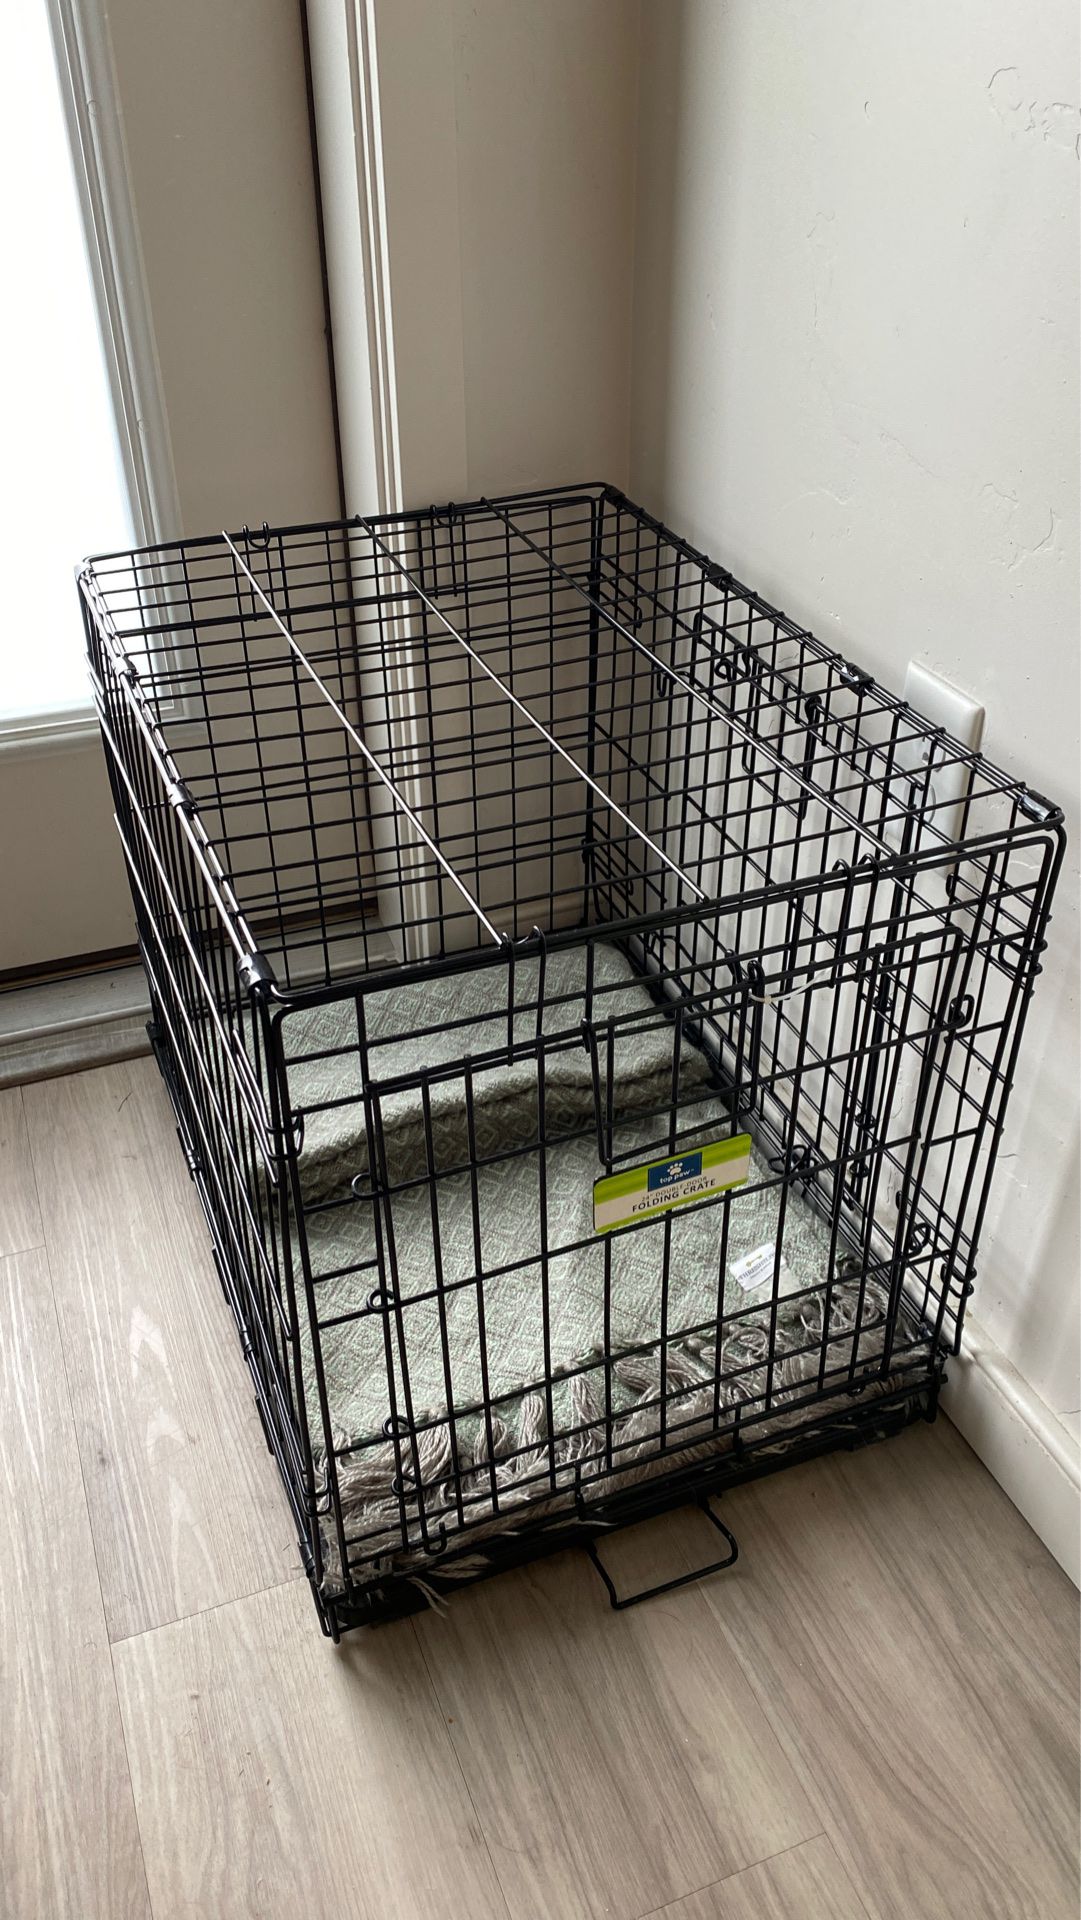 Small Dog Crate for Sale